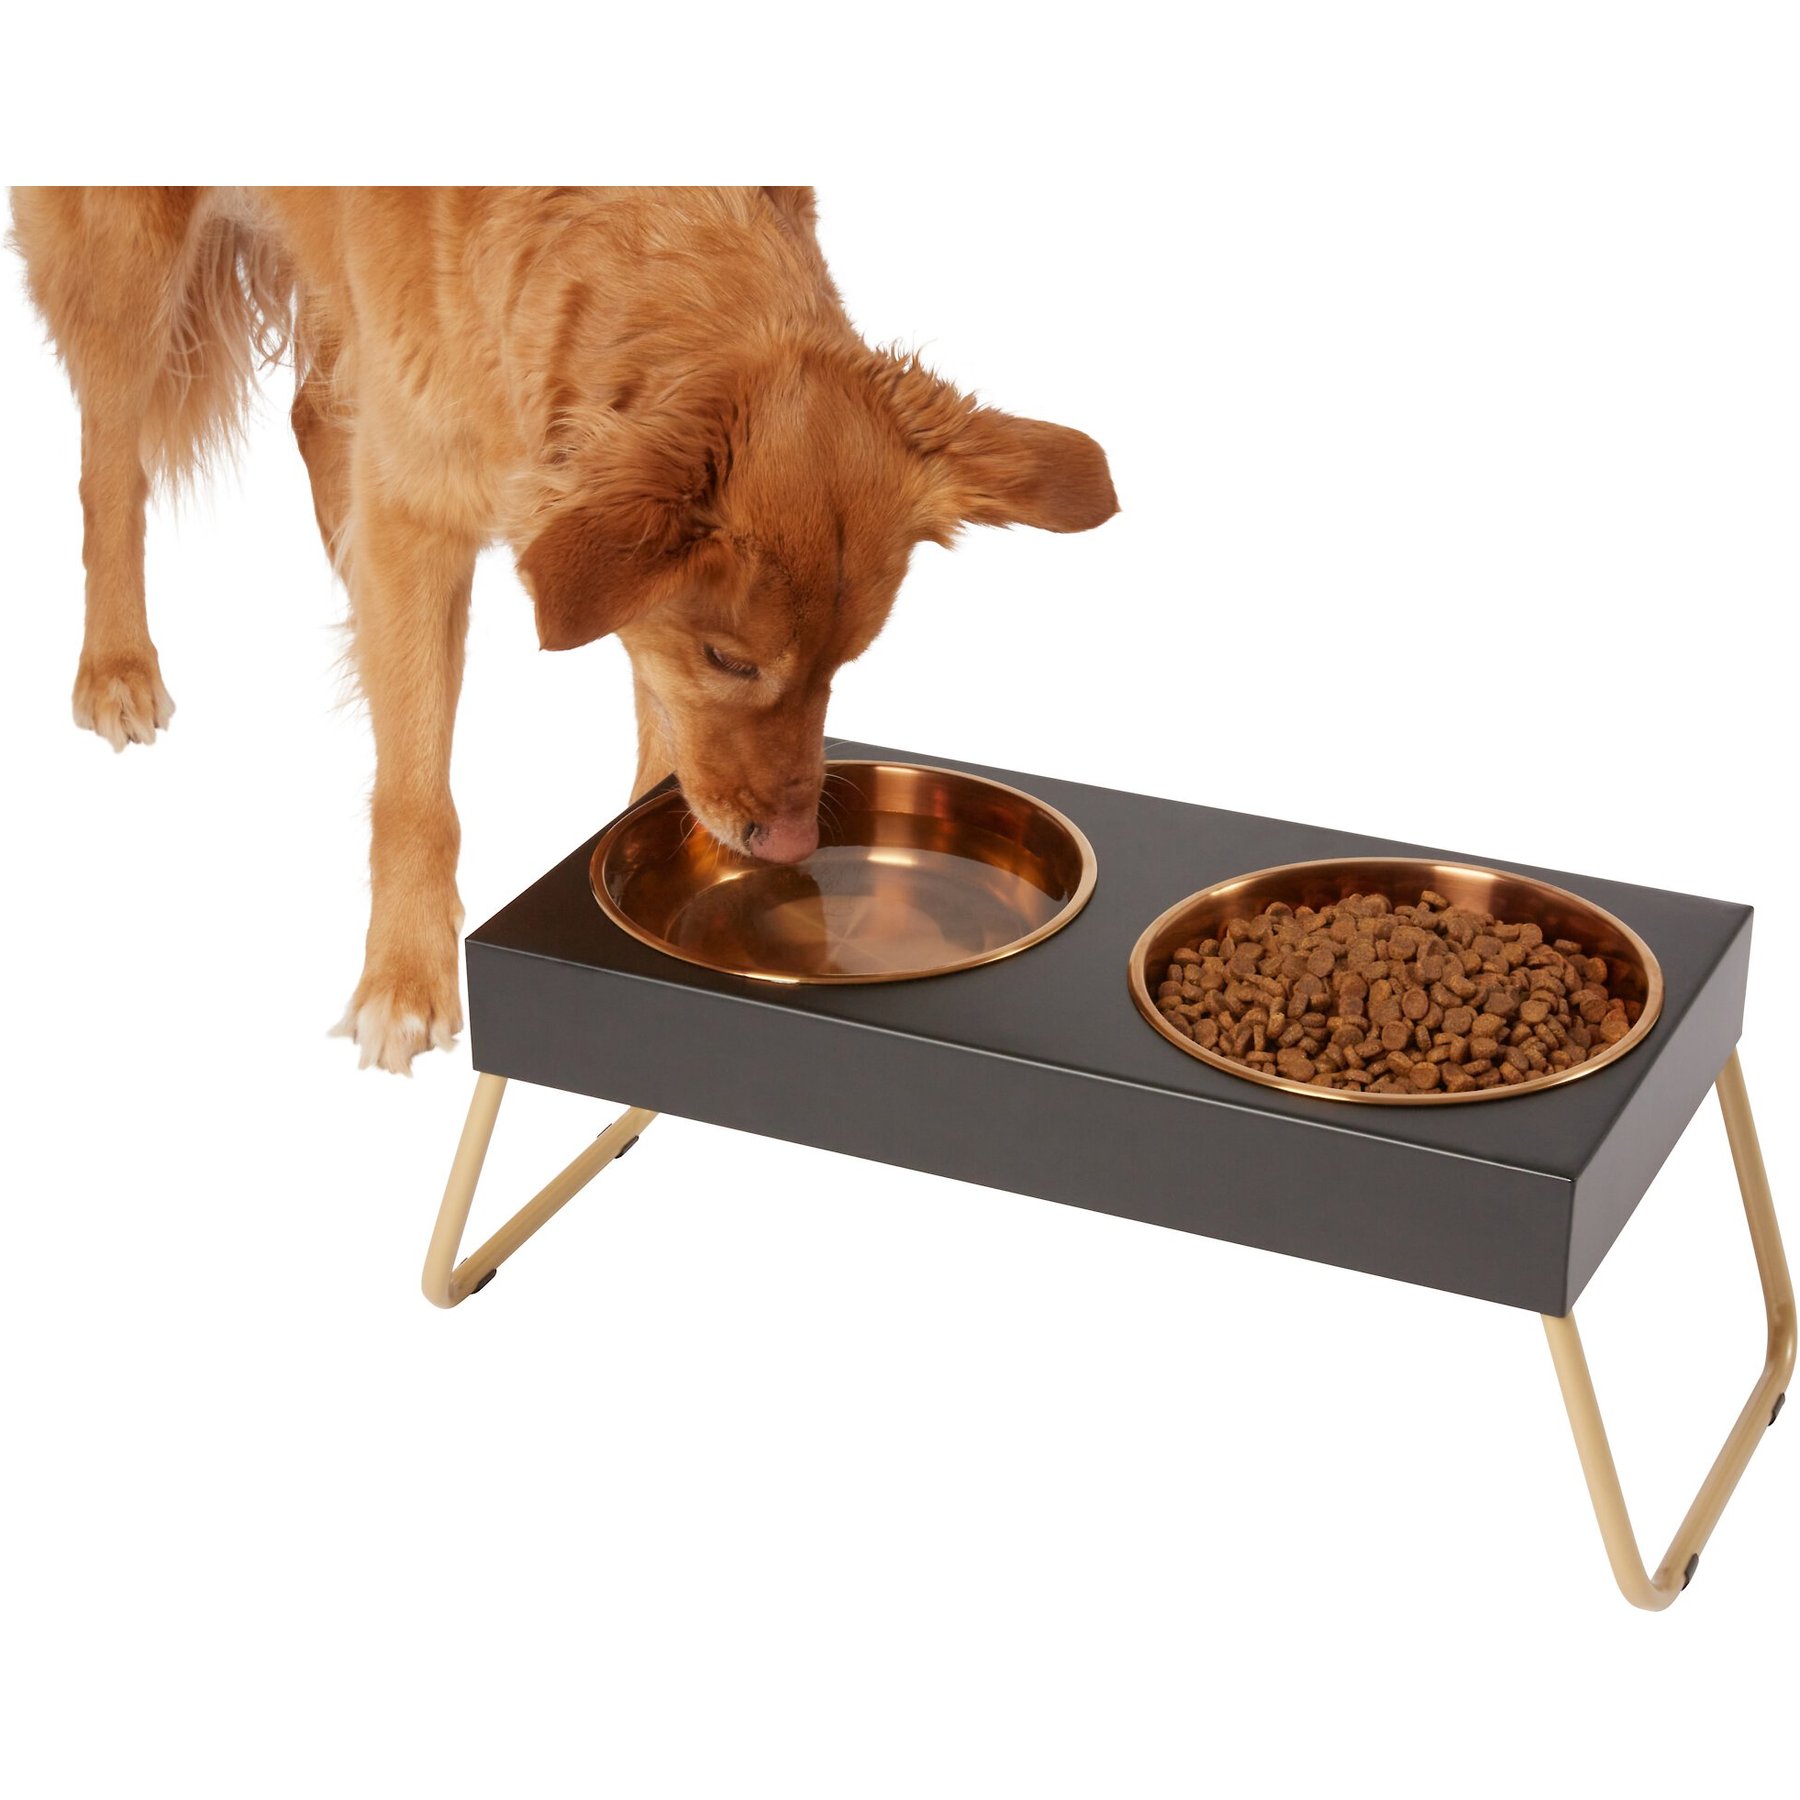 Premium 7 Elevated Dog and Cat Pet Feeder, Double Bowl Raised Stand Comes with